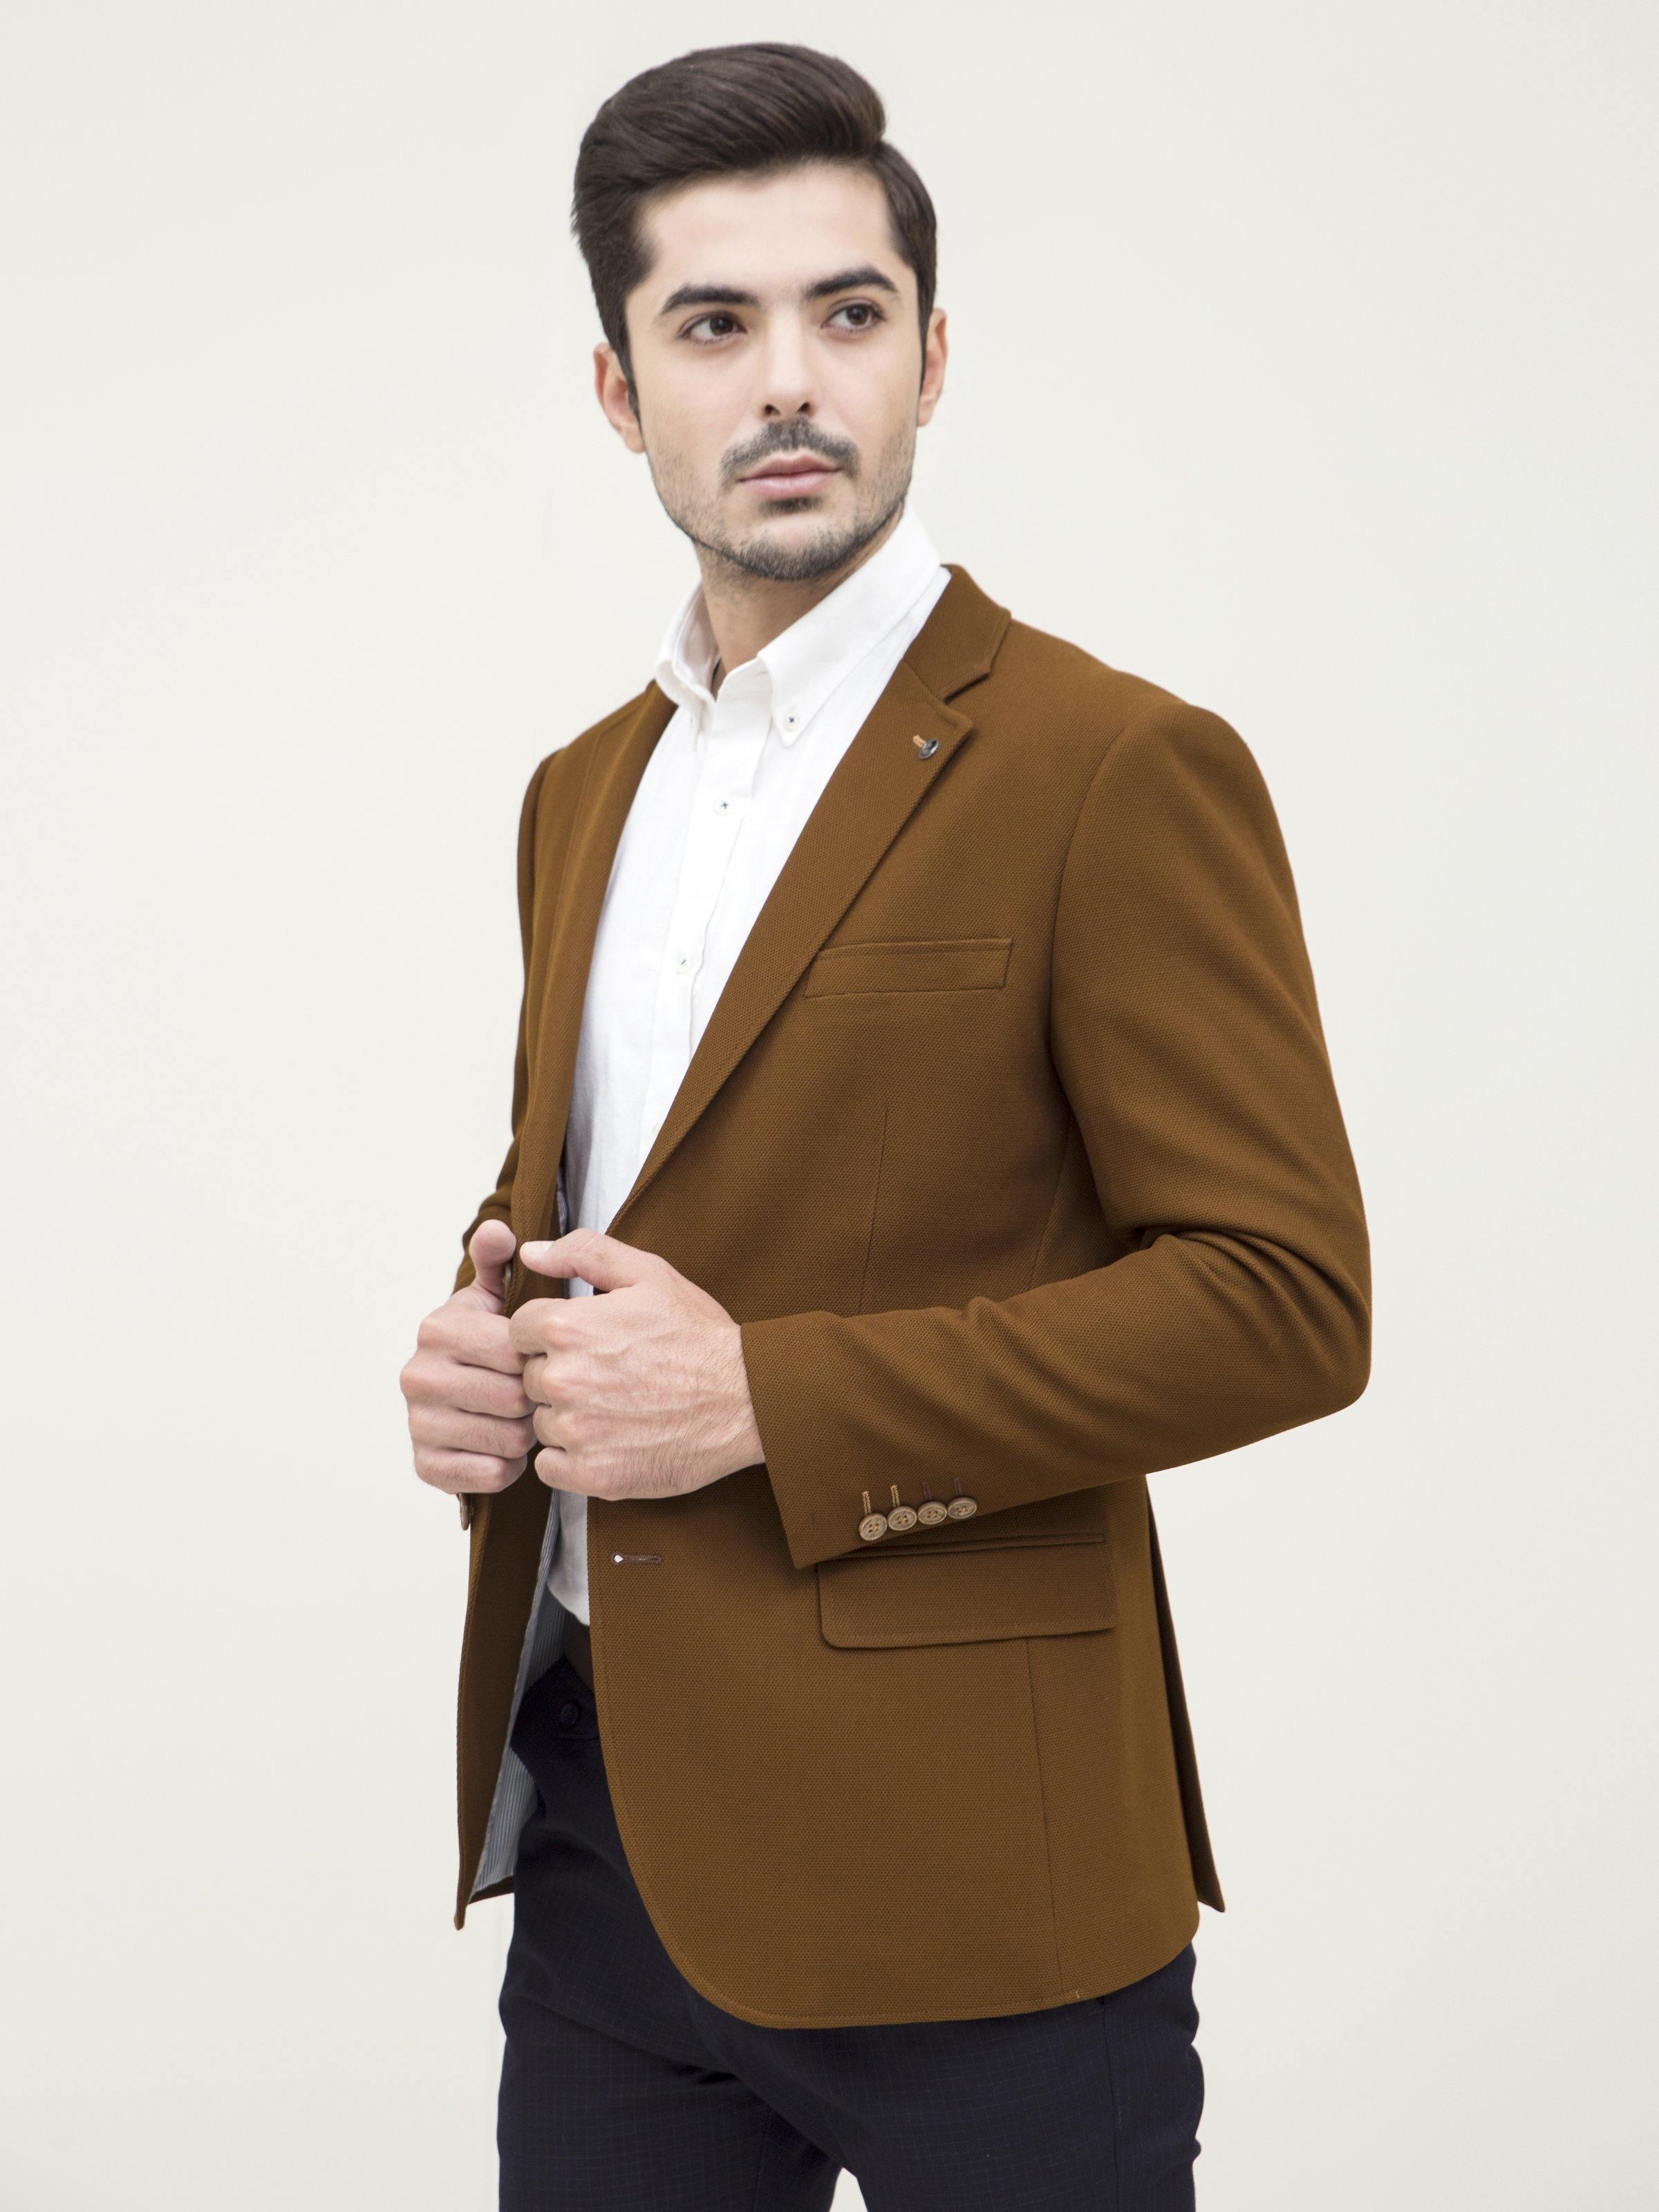 CASUAL COAT SLIM FIT CAMEL at Charcoal Clothing